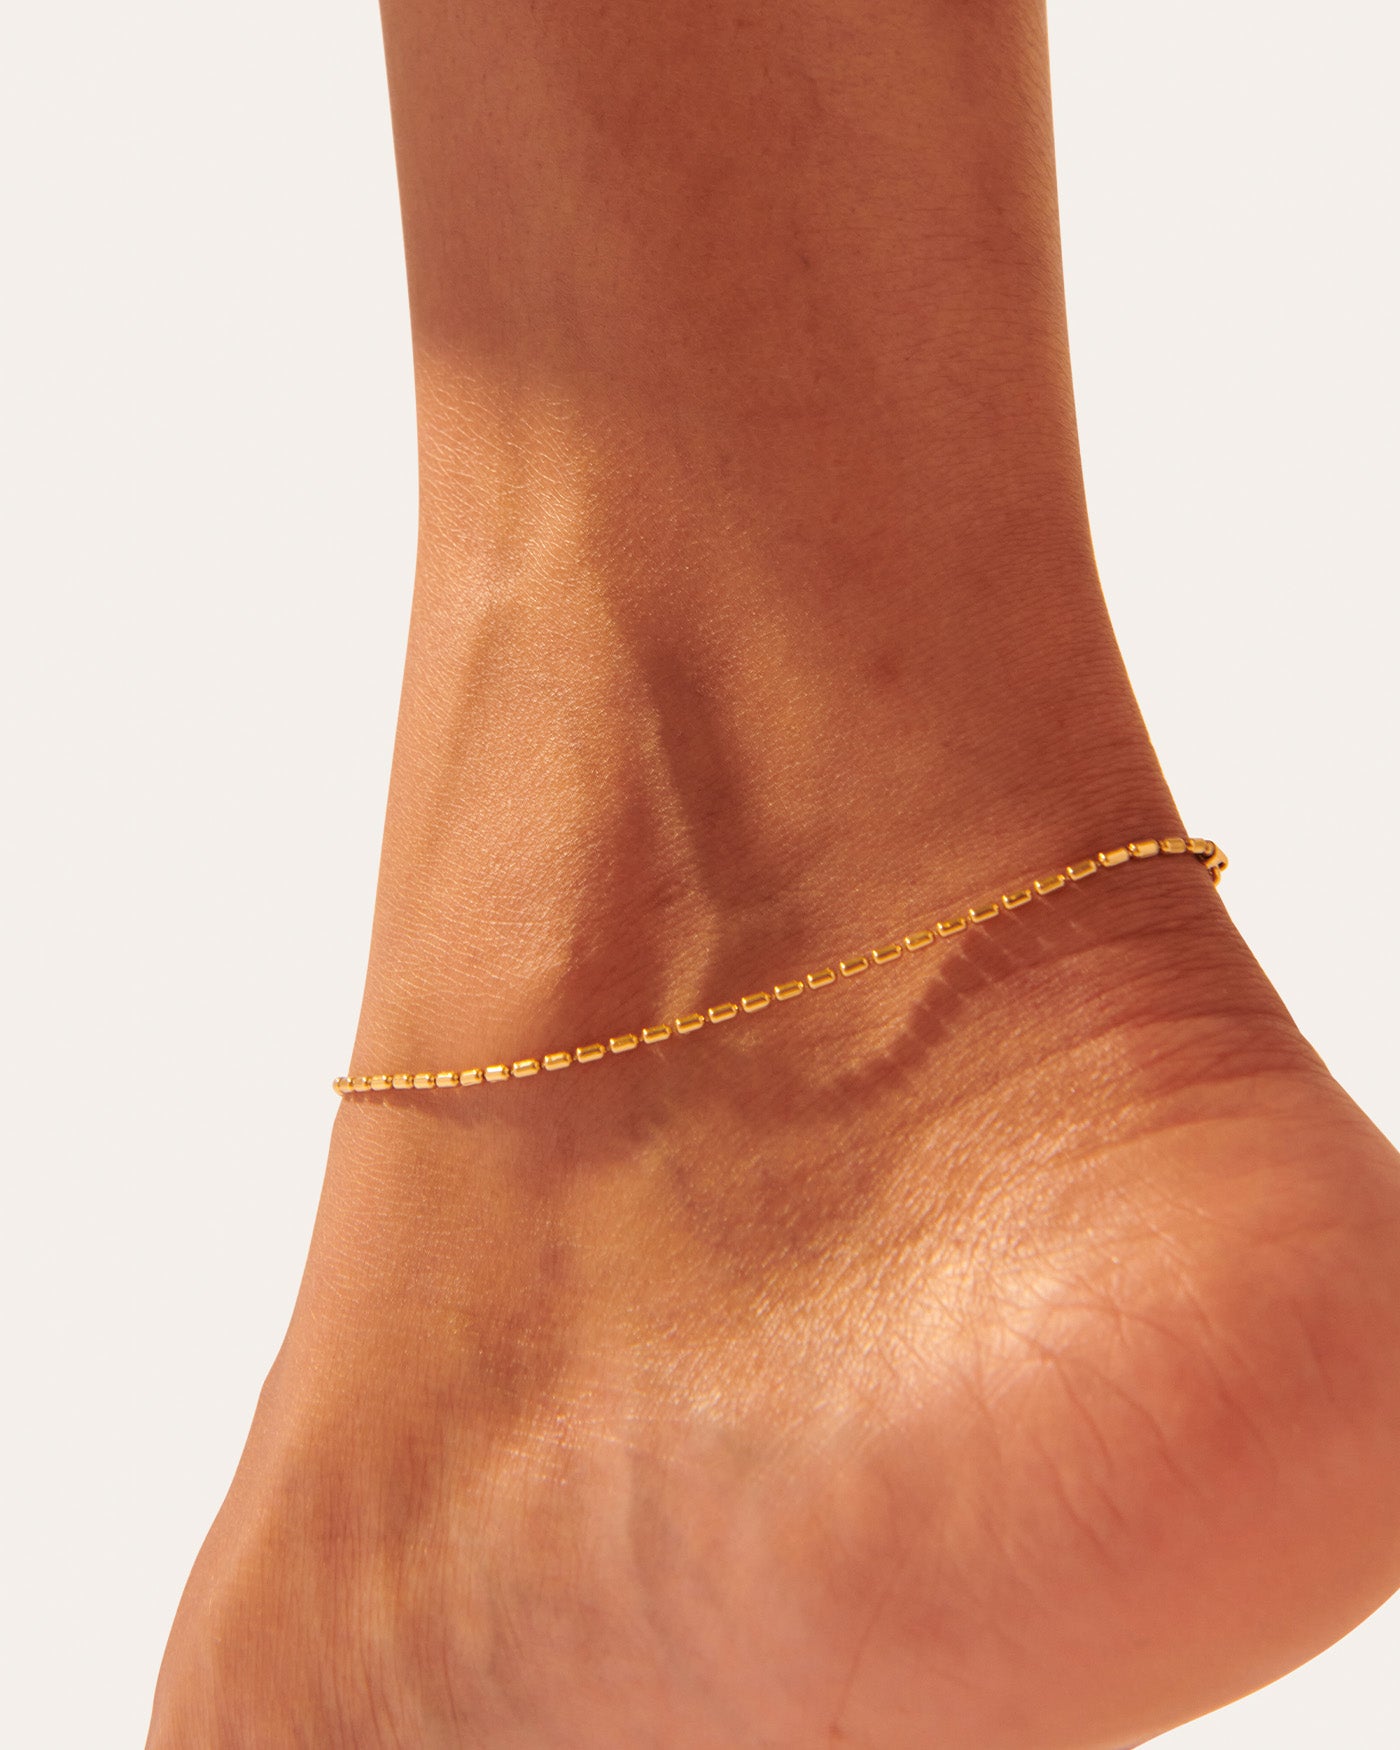 Anklet F9 - Pinsetta Moon